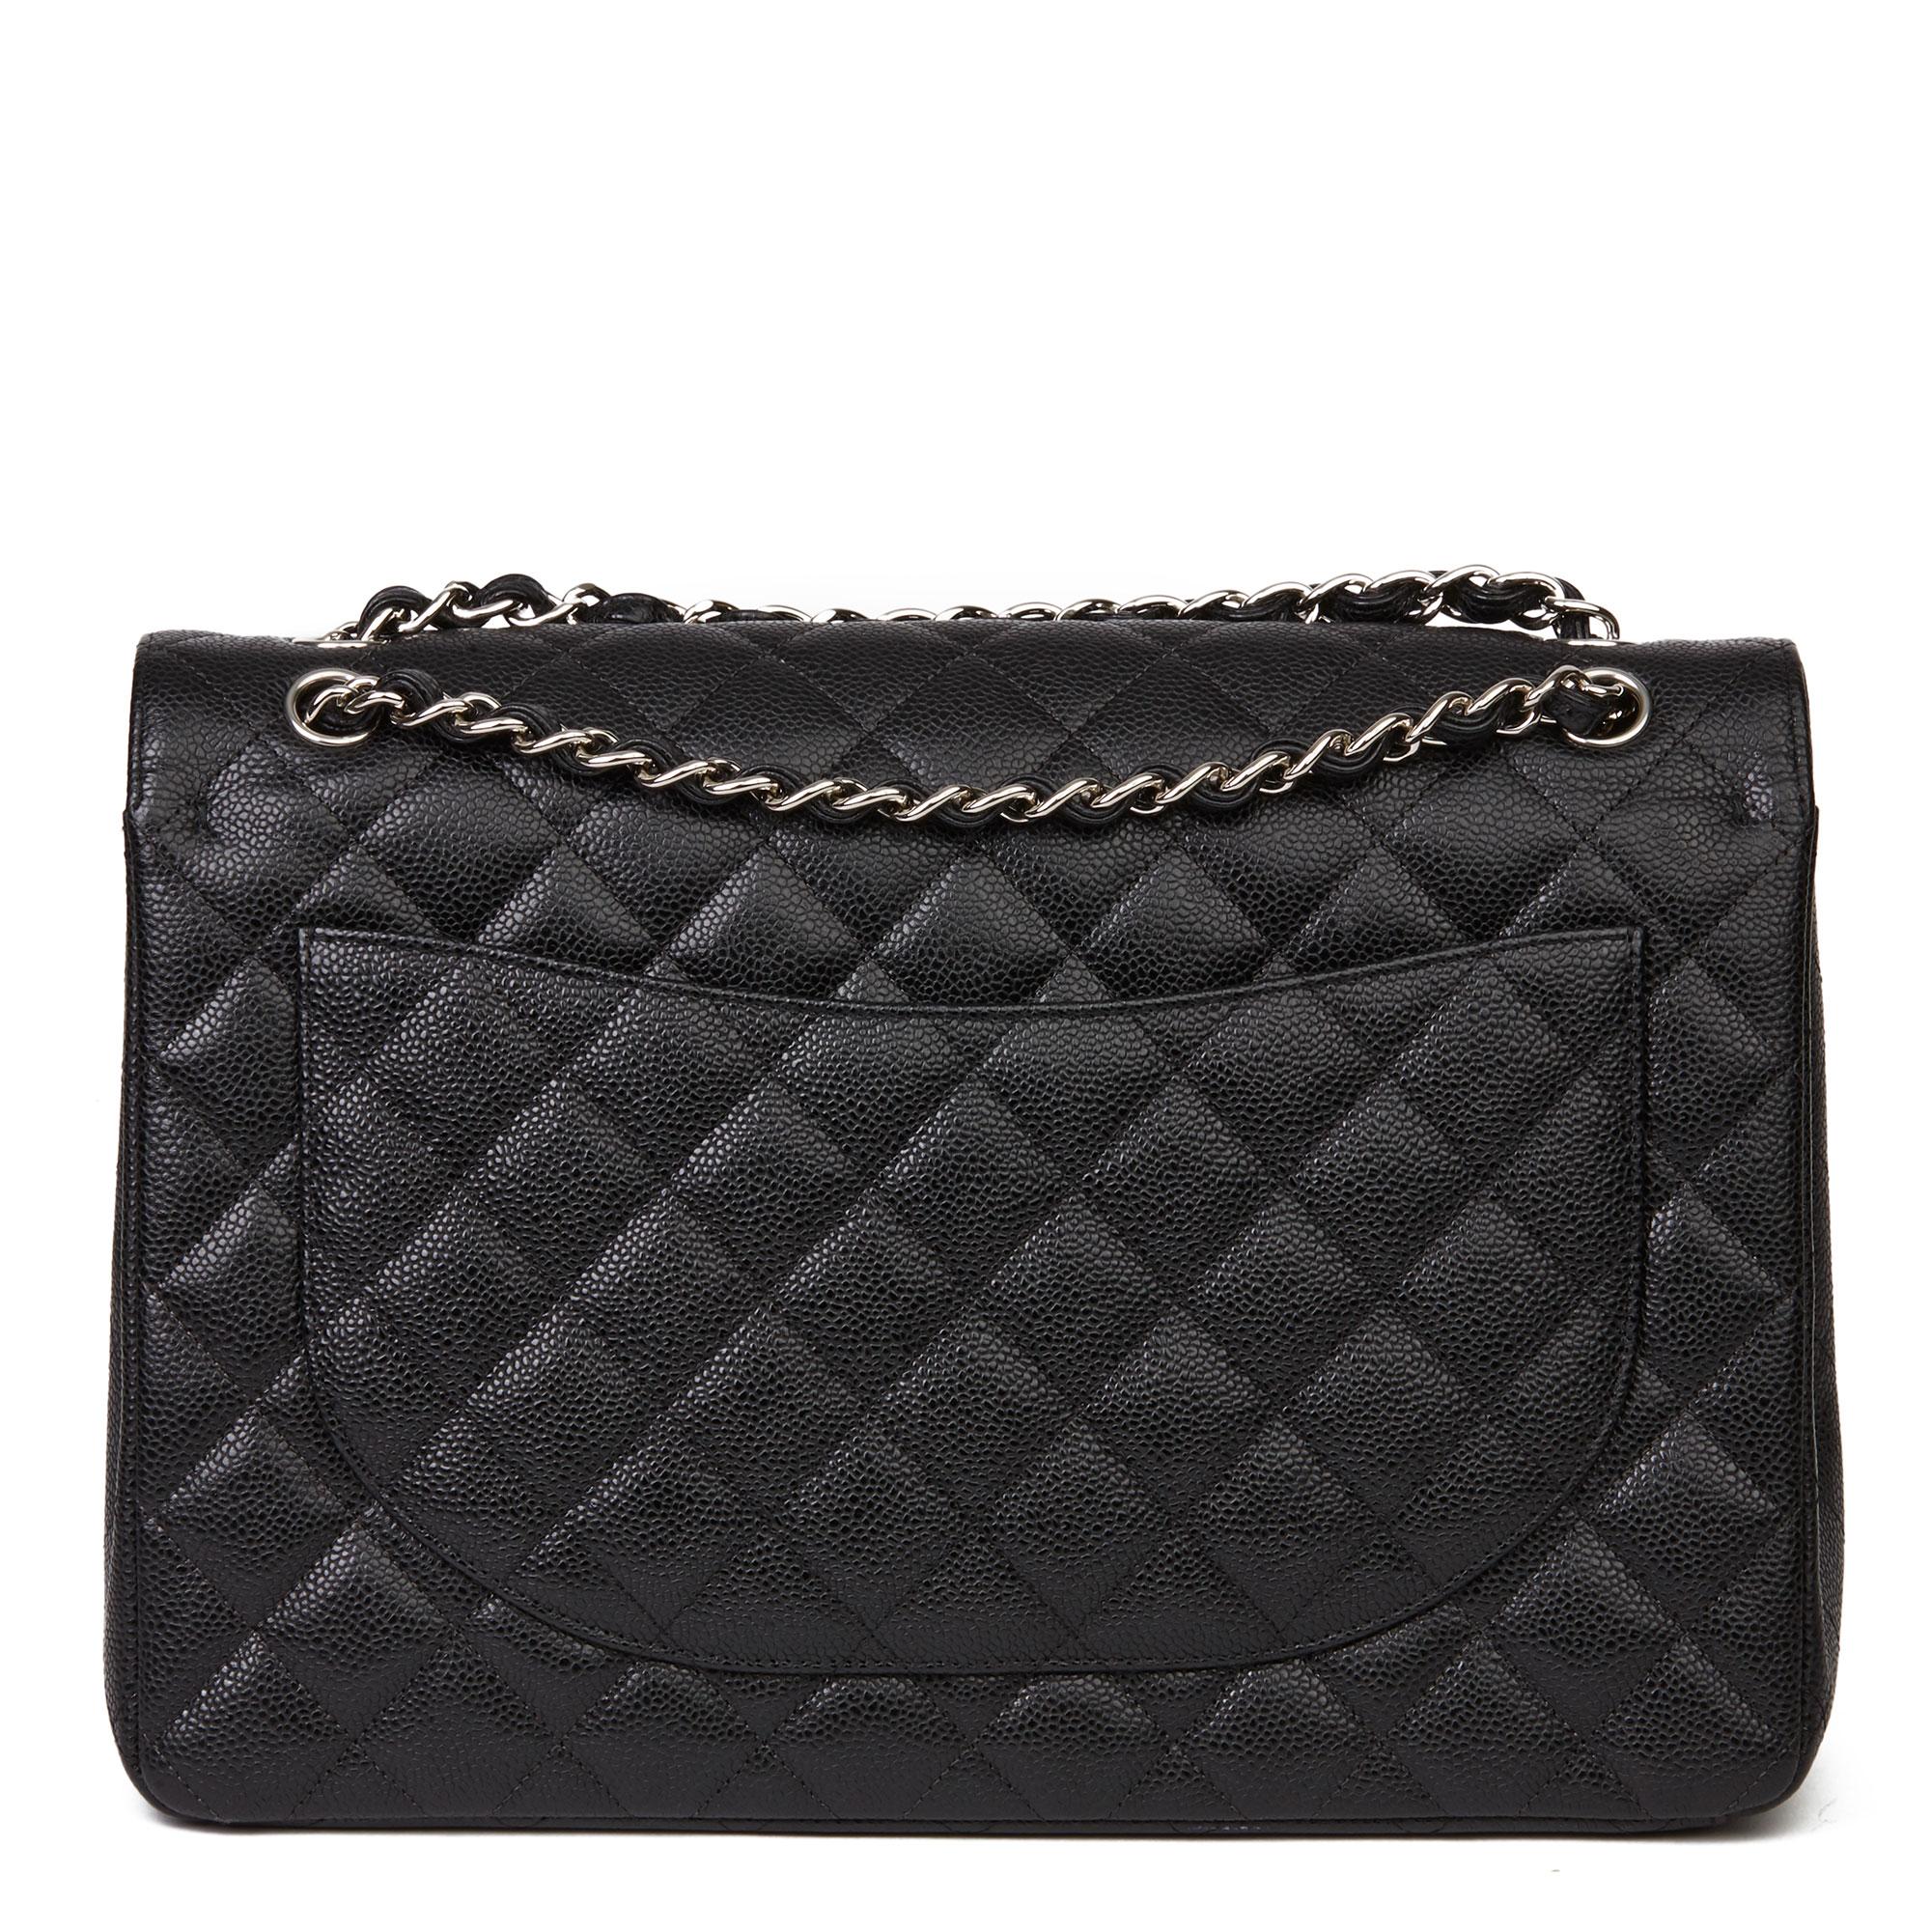 2014 Chanel Black Quilted Caviar Leather Maxi Classic Double Flap Bag ...